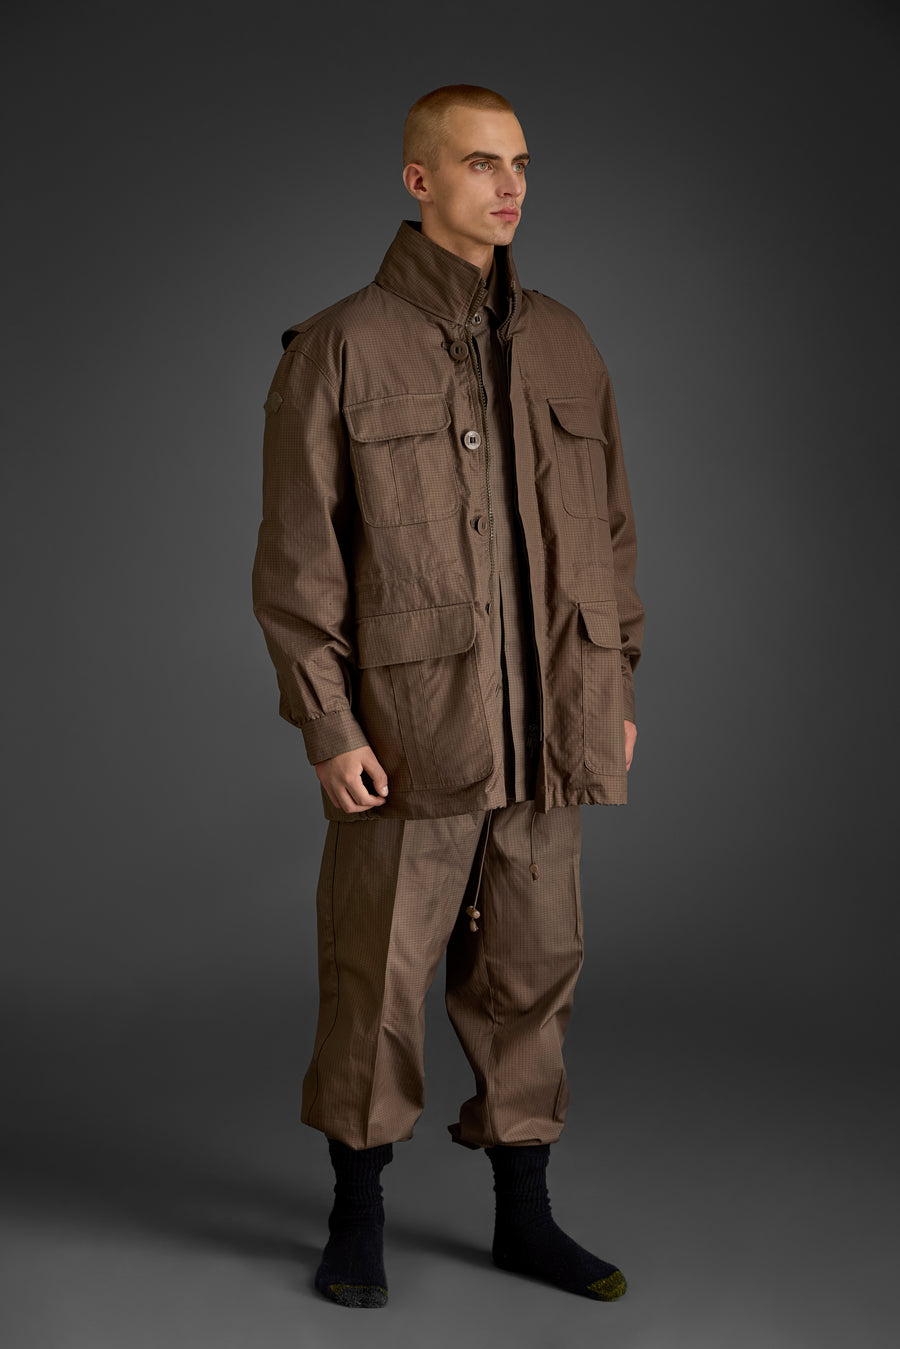 Field Jacket Designed for Public Security Agency